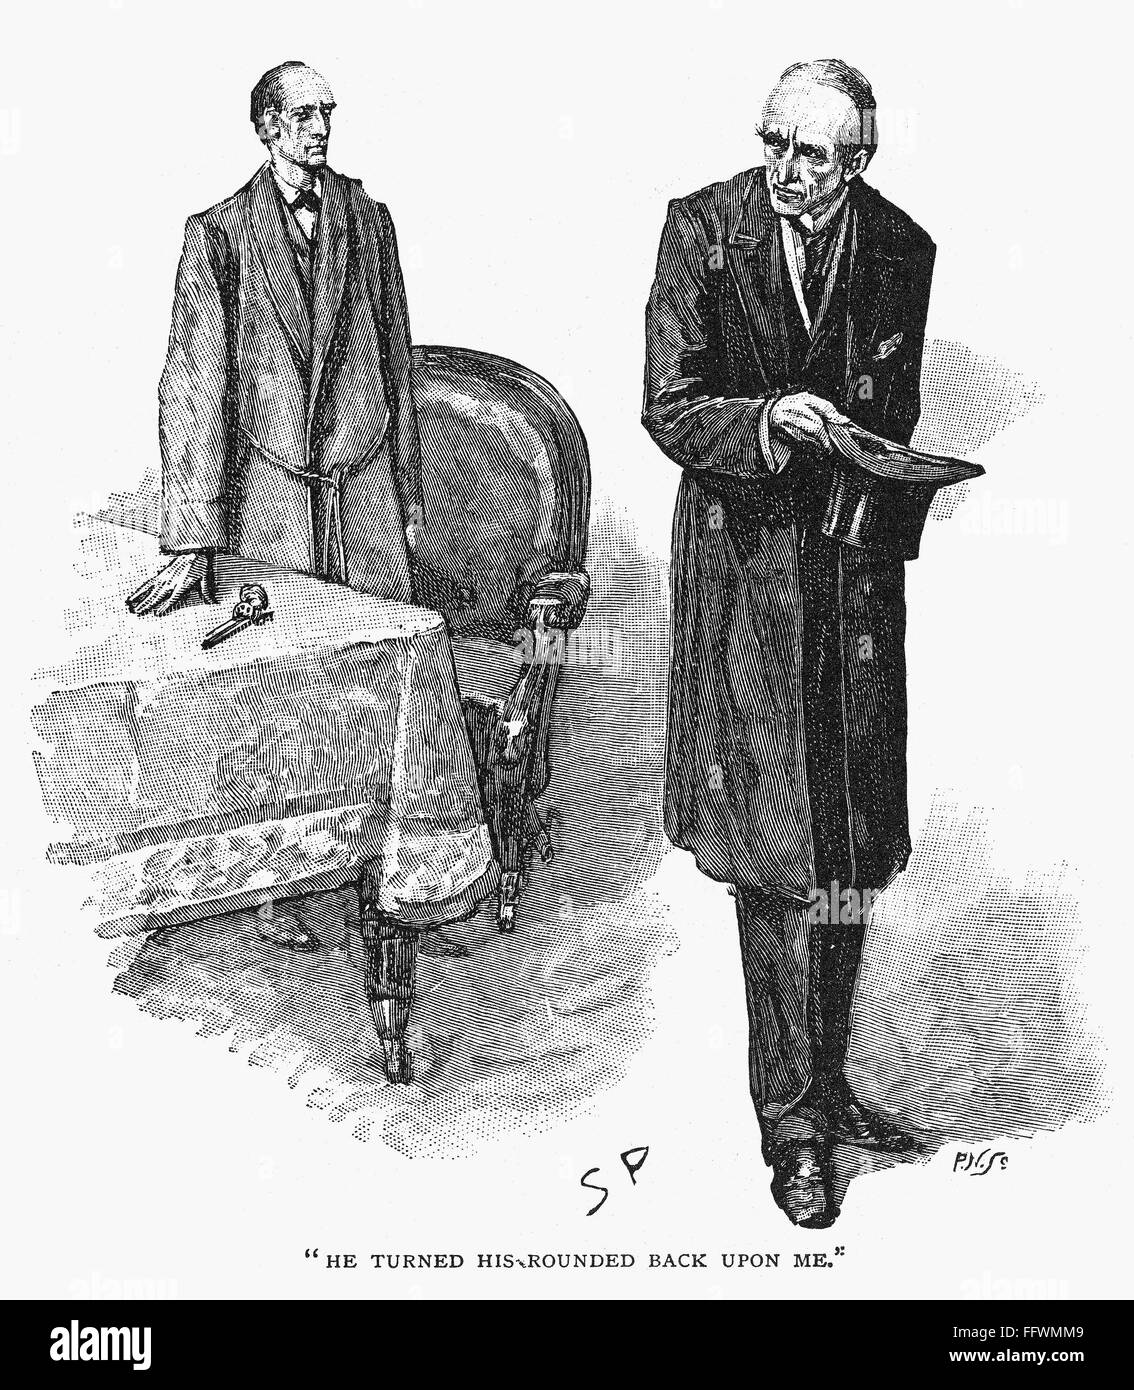 DOYLE: SHERLOCK HOLMES. /nSherlock Holmes (left) concludes an interview with the 'Napoleon of crime', Professor Moriarty. Wood engraving after a drawing by Sidney Paget from the 'Strand' magazine for Sir Arthur Conan Doyle's 'The Adventure of the Final Pr Stock Photo